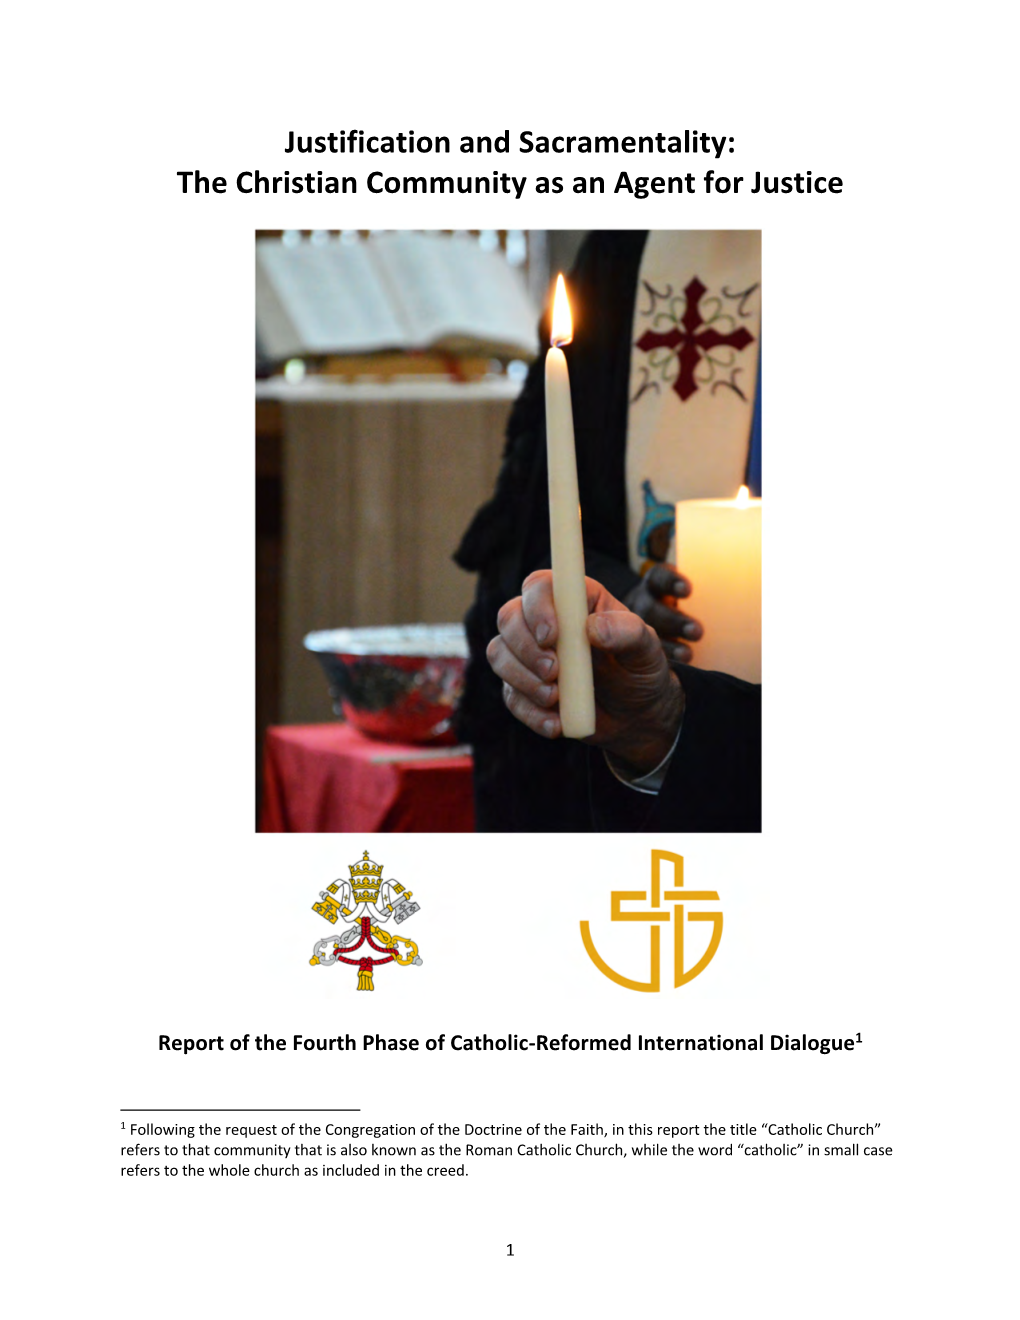 Justification and Sacramentality: the Christian Community As an Agent for Justice